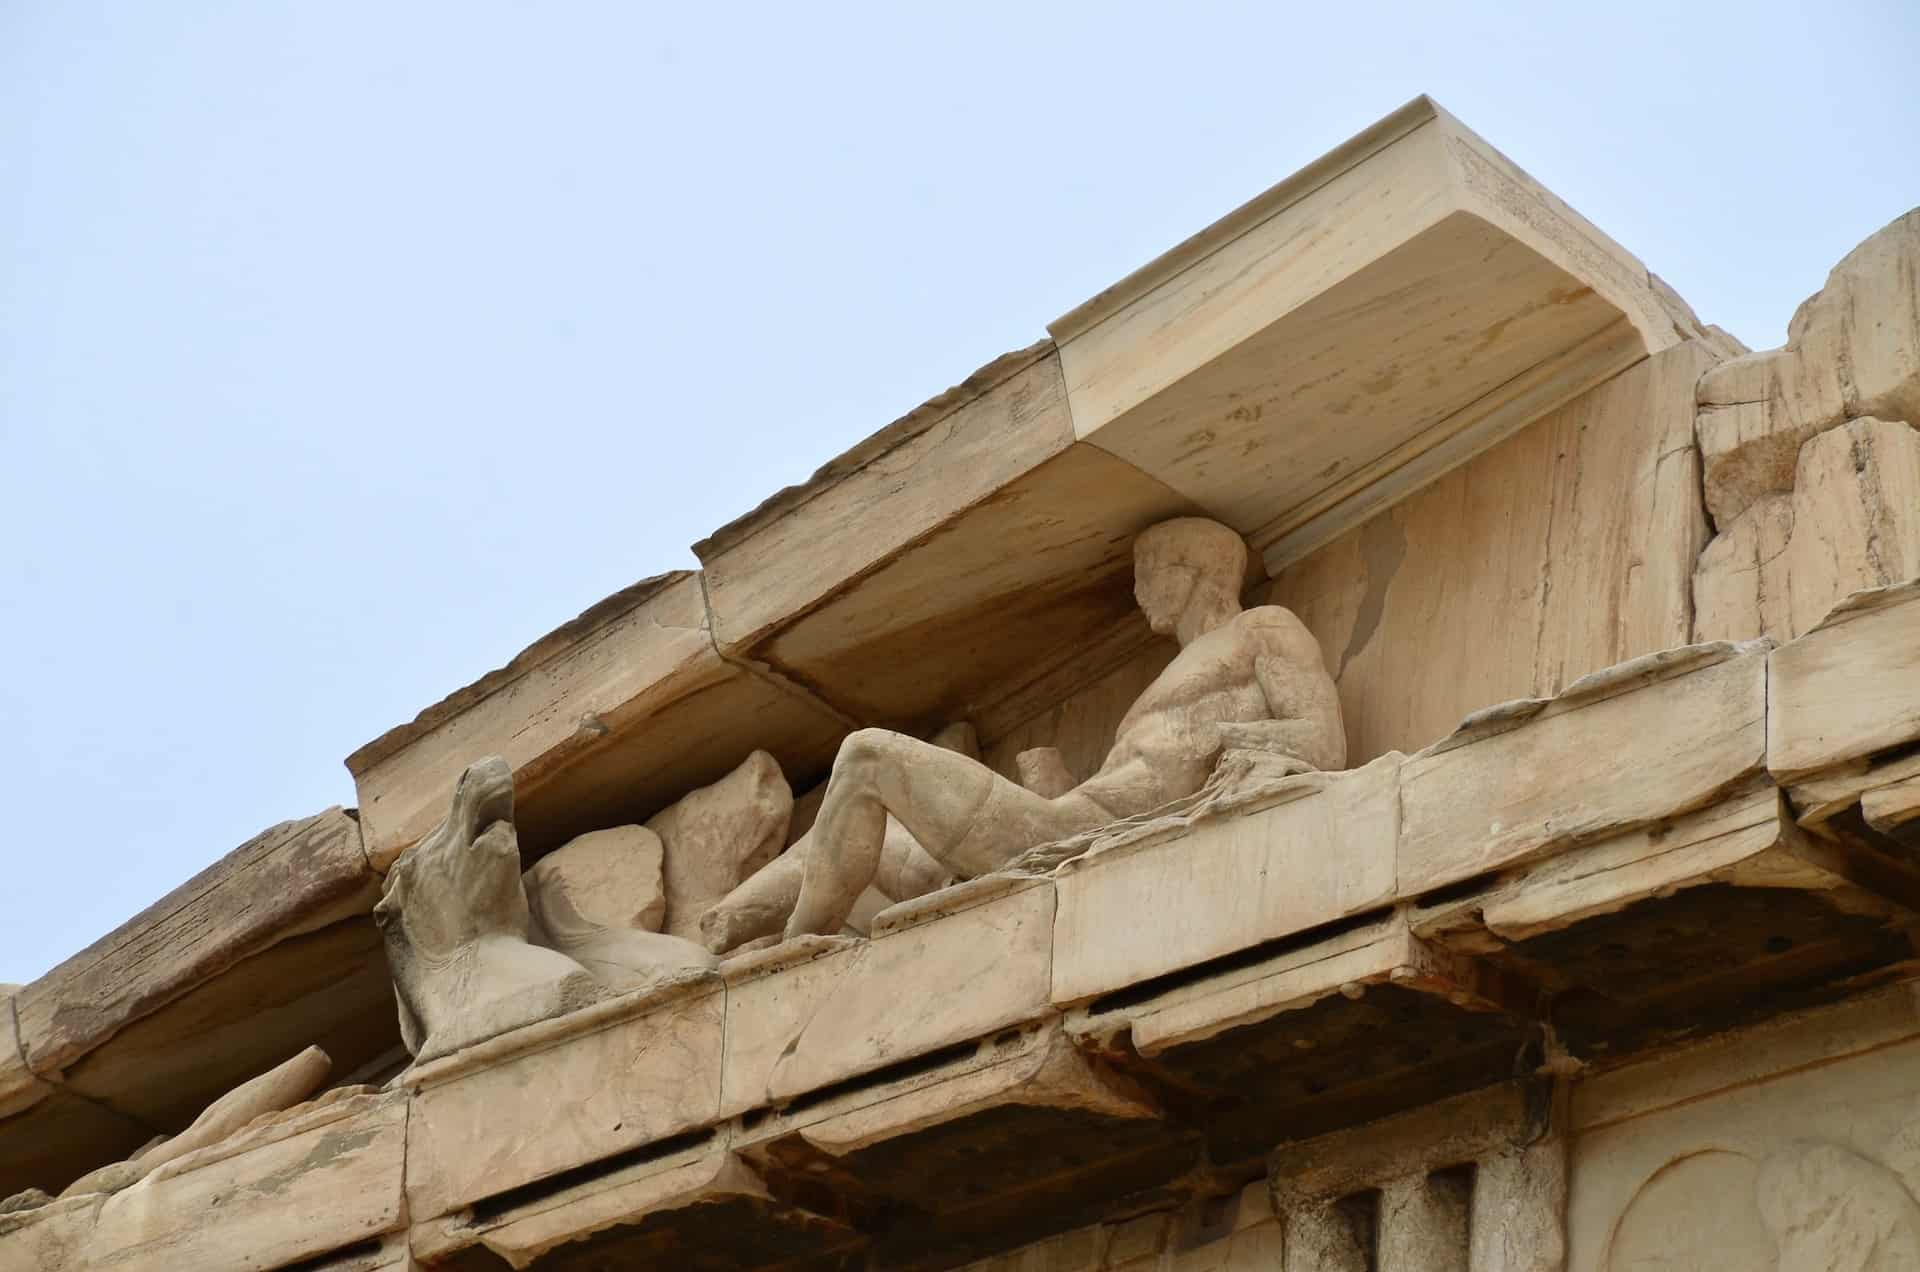 Sculptures on the east pediment of the Parthenon on the Acropolis in Athens, Greece